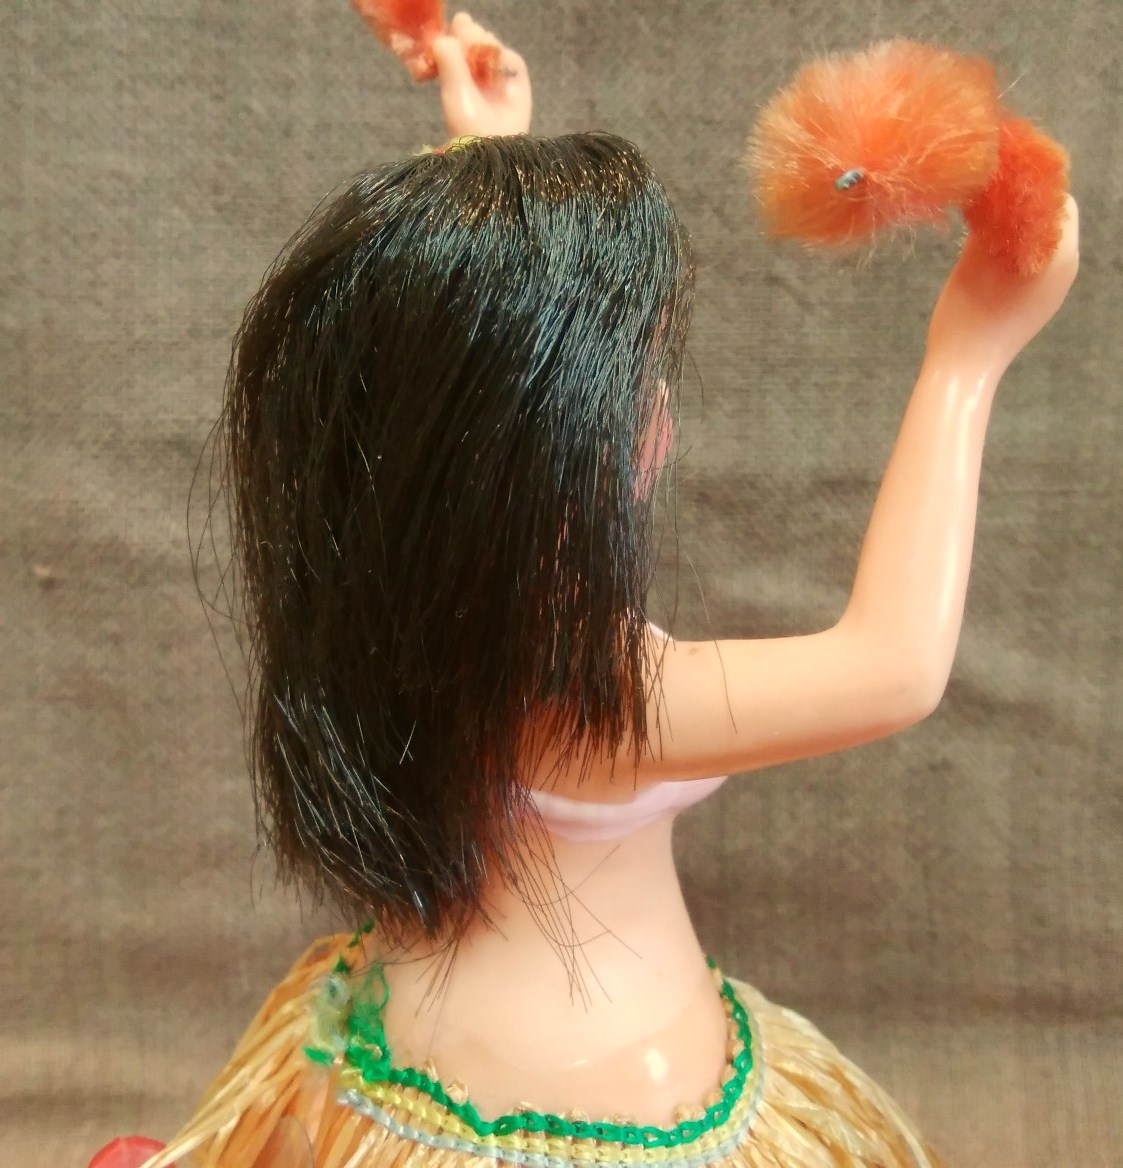  Showa Retro that time thing tokiwa Hawaiian center fla girl hula dance zen my fla doll .... operation verification settled total length approximately 16cm( most under from hand .)